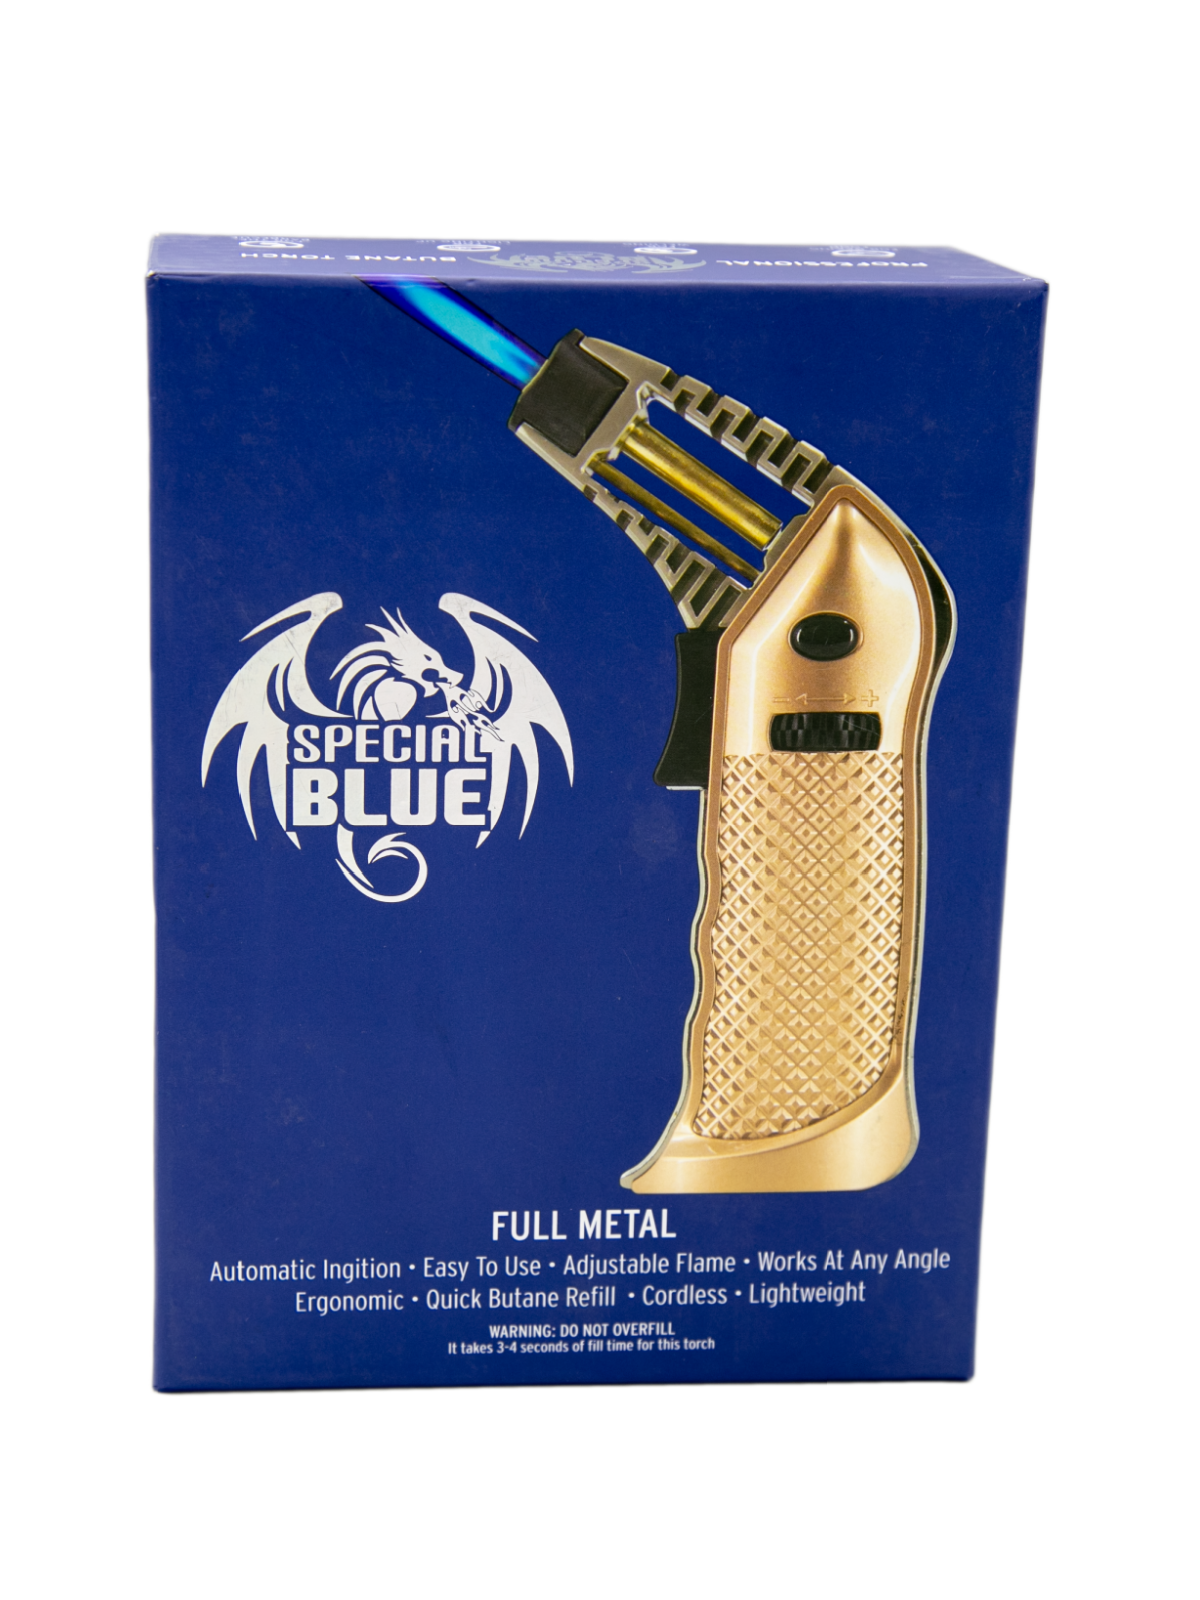 SPECIAL BLUE FULL METAL TORCH GOLD 1 CT